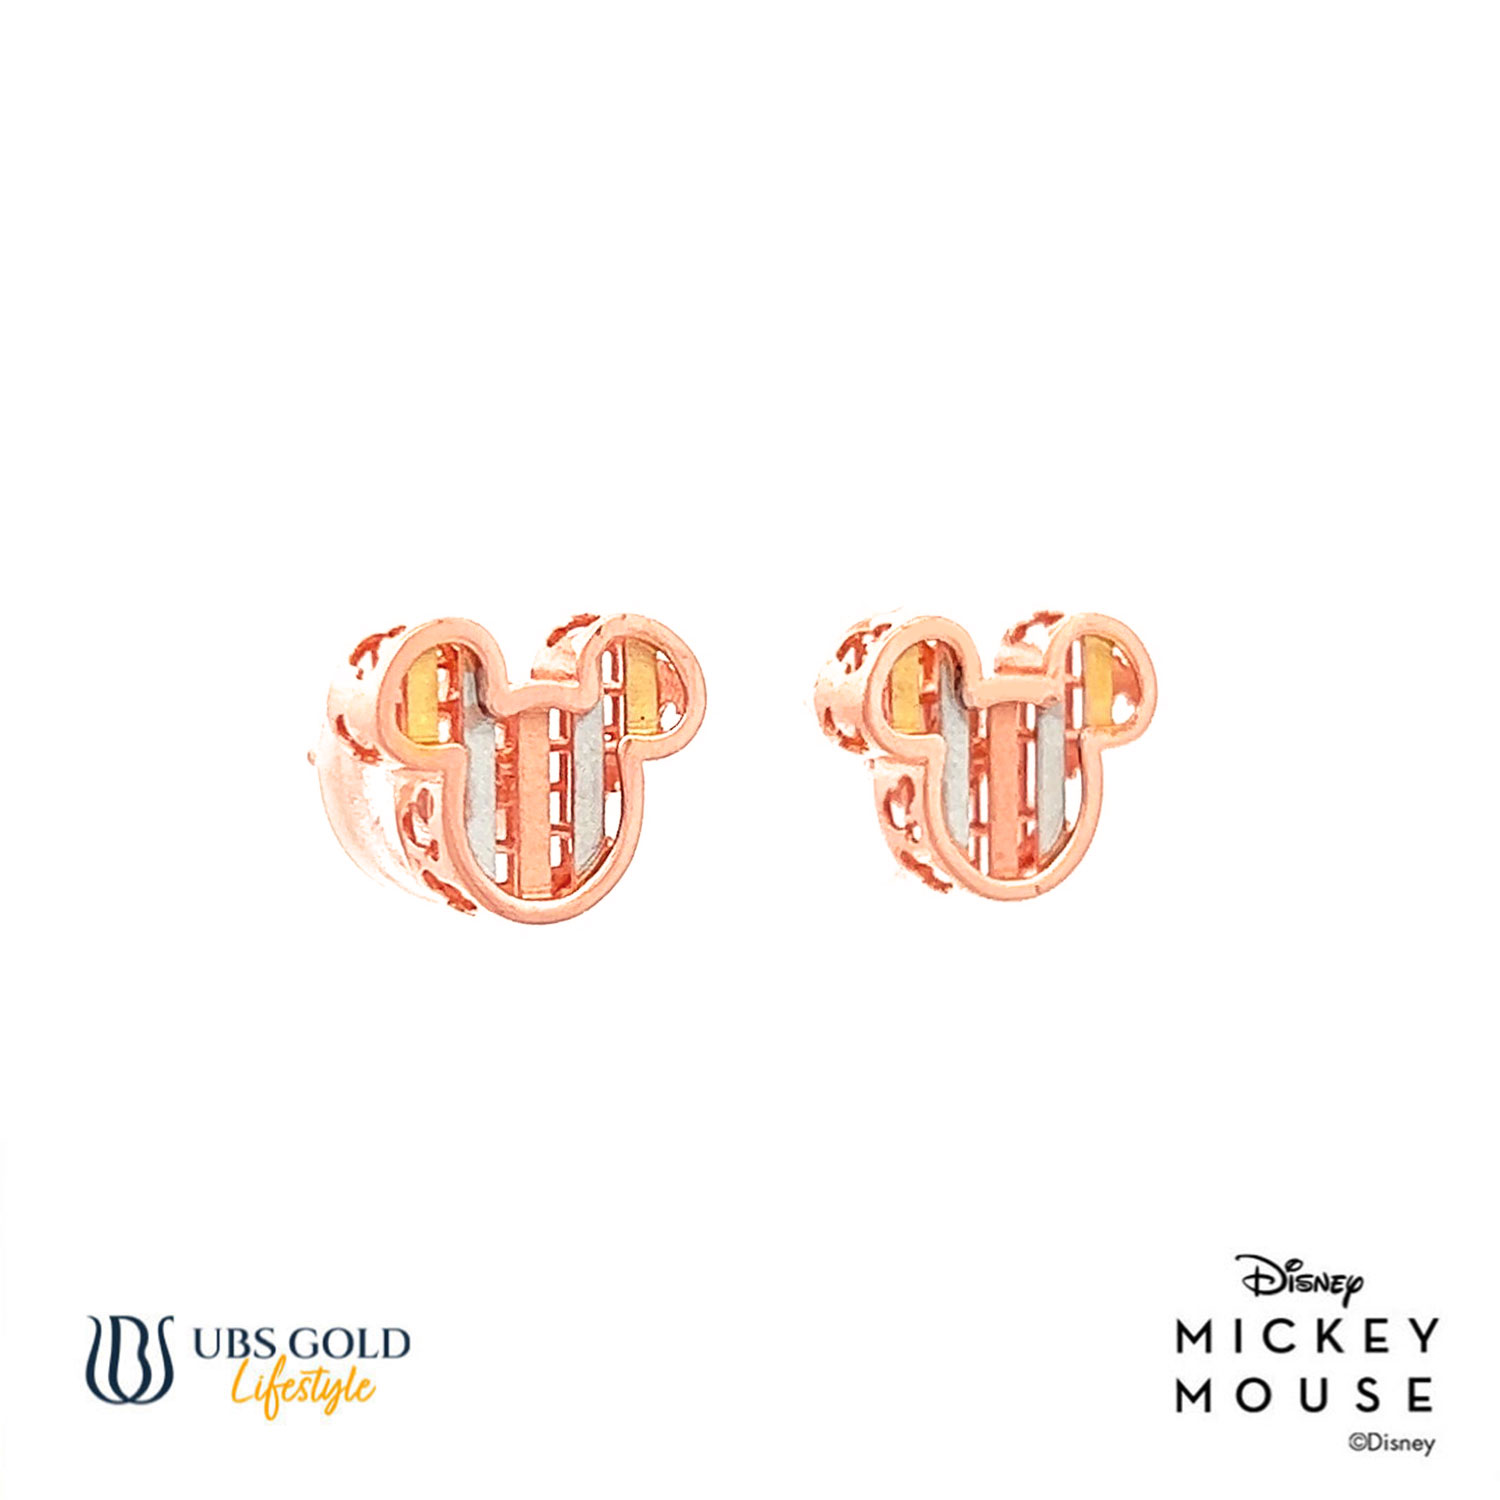 UBS Anting Emas Disney Mickey Mouse - Cwy0049 - 17K